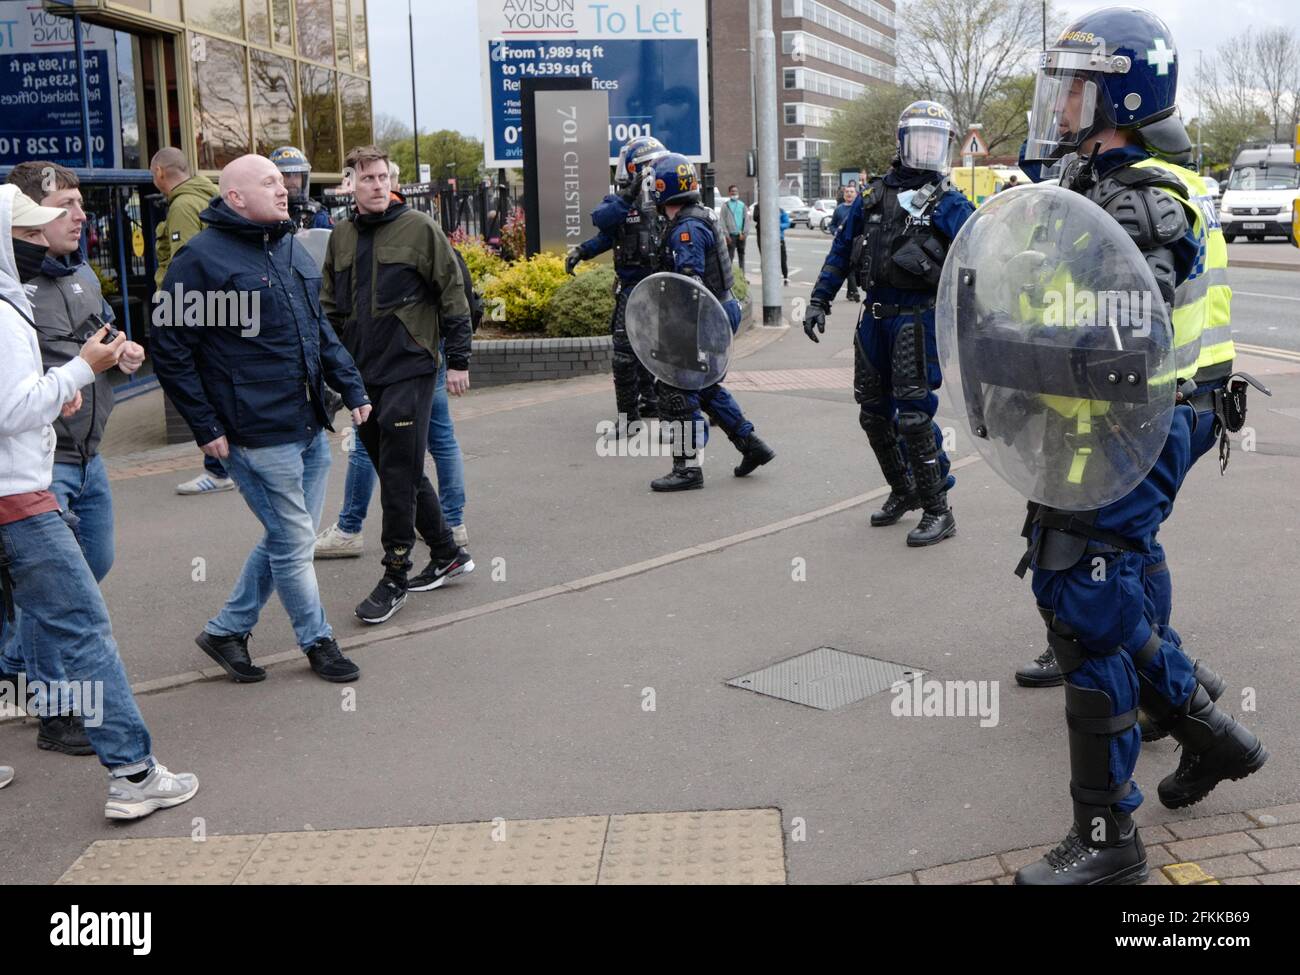 Manchester UK 2.May.2021 Manchester Utd Protests Match called off after unrest. Crowds dispersed by mounted police and Tactical aid units. Protest at Old Trafford. Protesters are rallying against owners. Manchester United fans are Anti Glazers the American owners.Credit: GARY ROBERTS/Alamy Live News Stock Photo